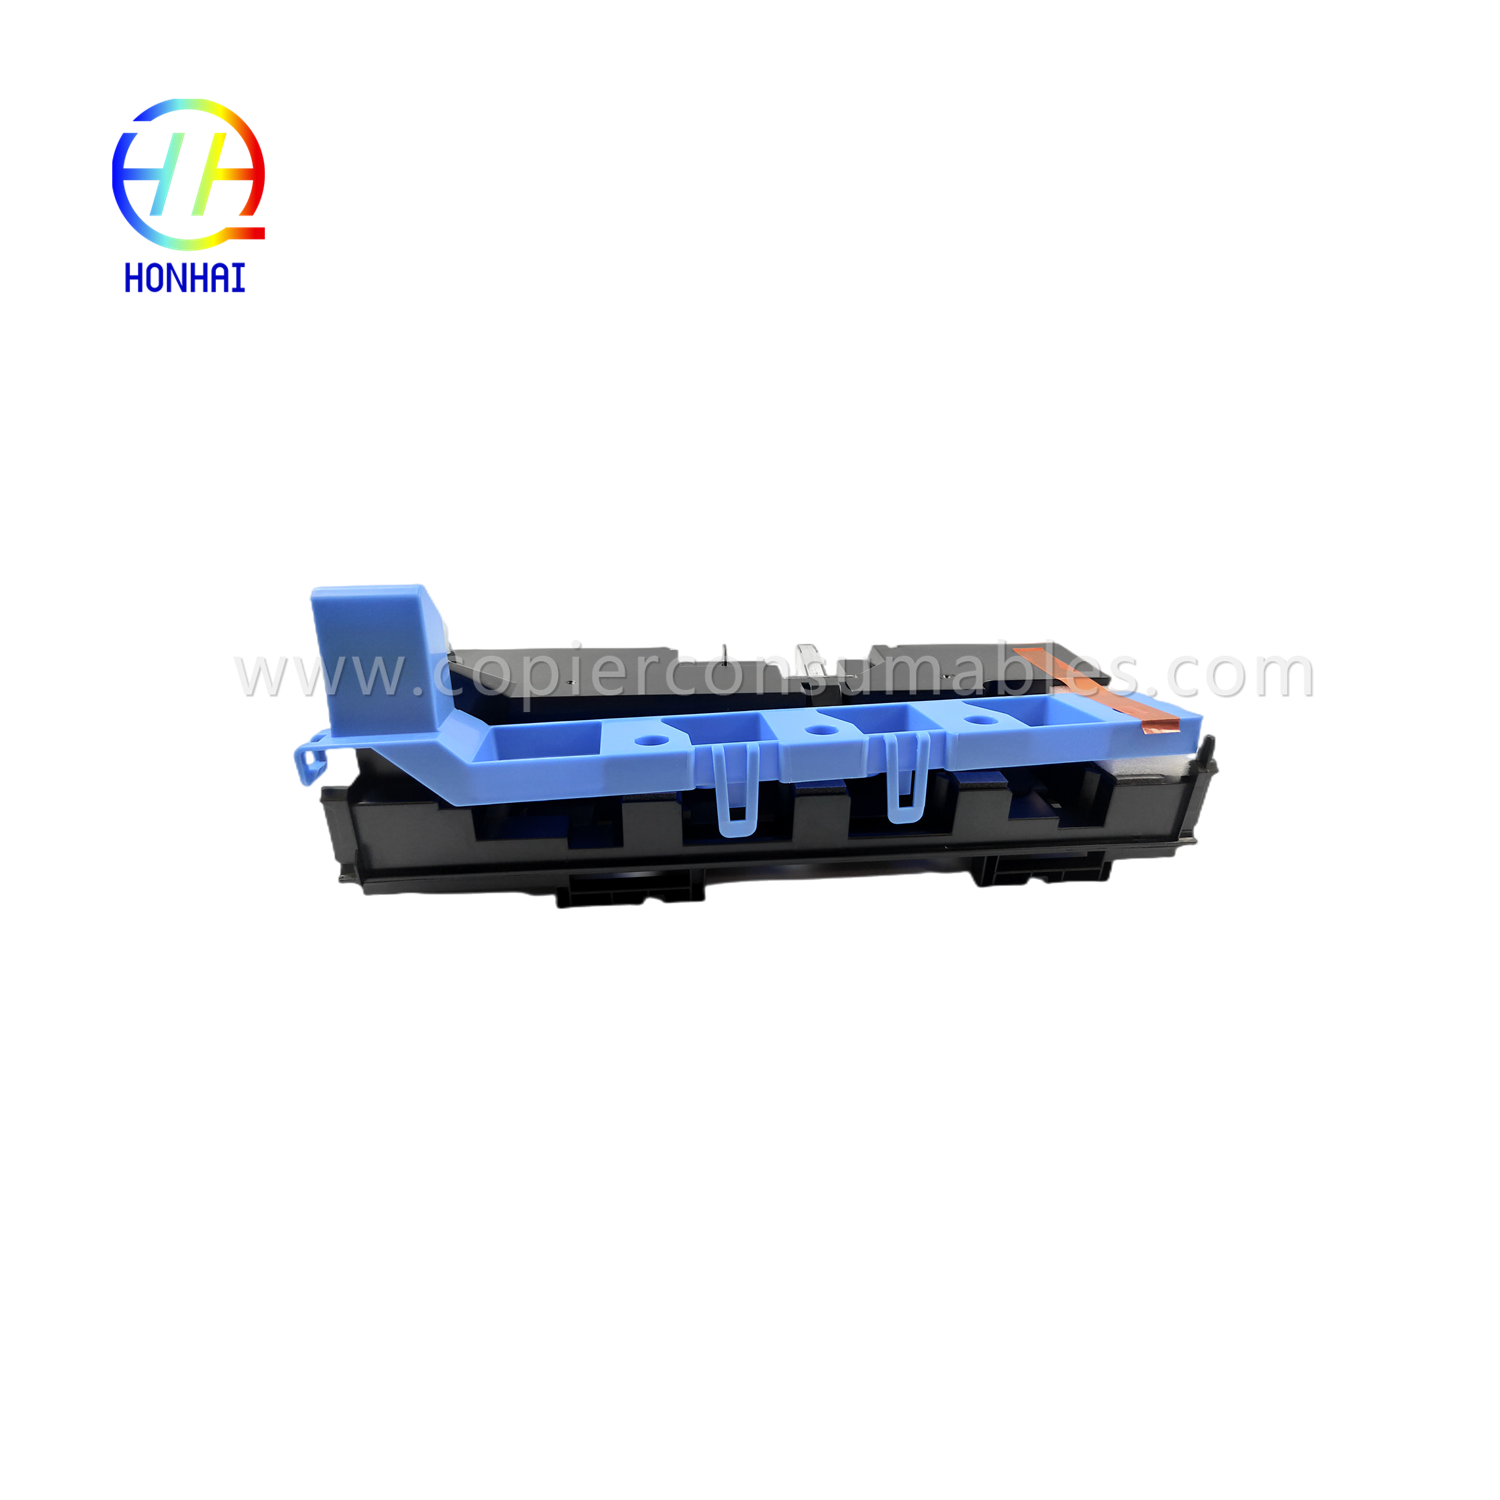 https://c585.goodao.net/waste-toner-container-for-konica-minolta-bizhub-c226-c256-c266-c227-c287-c367-c7333-c7226-c7528-wx-105-a8jjwy- টোনার-বক্স-পণ্য/